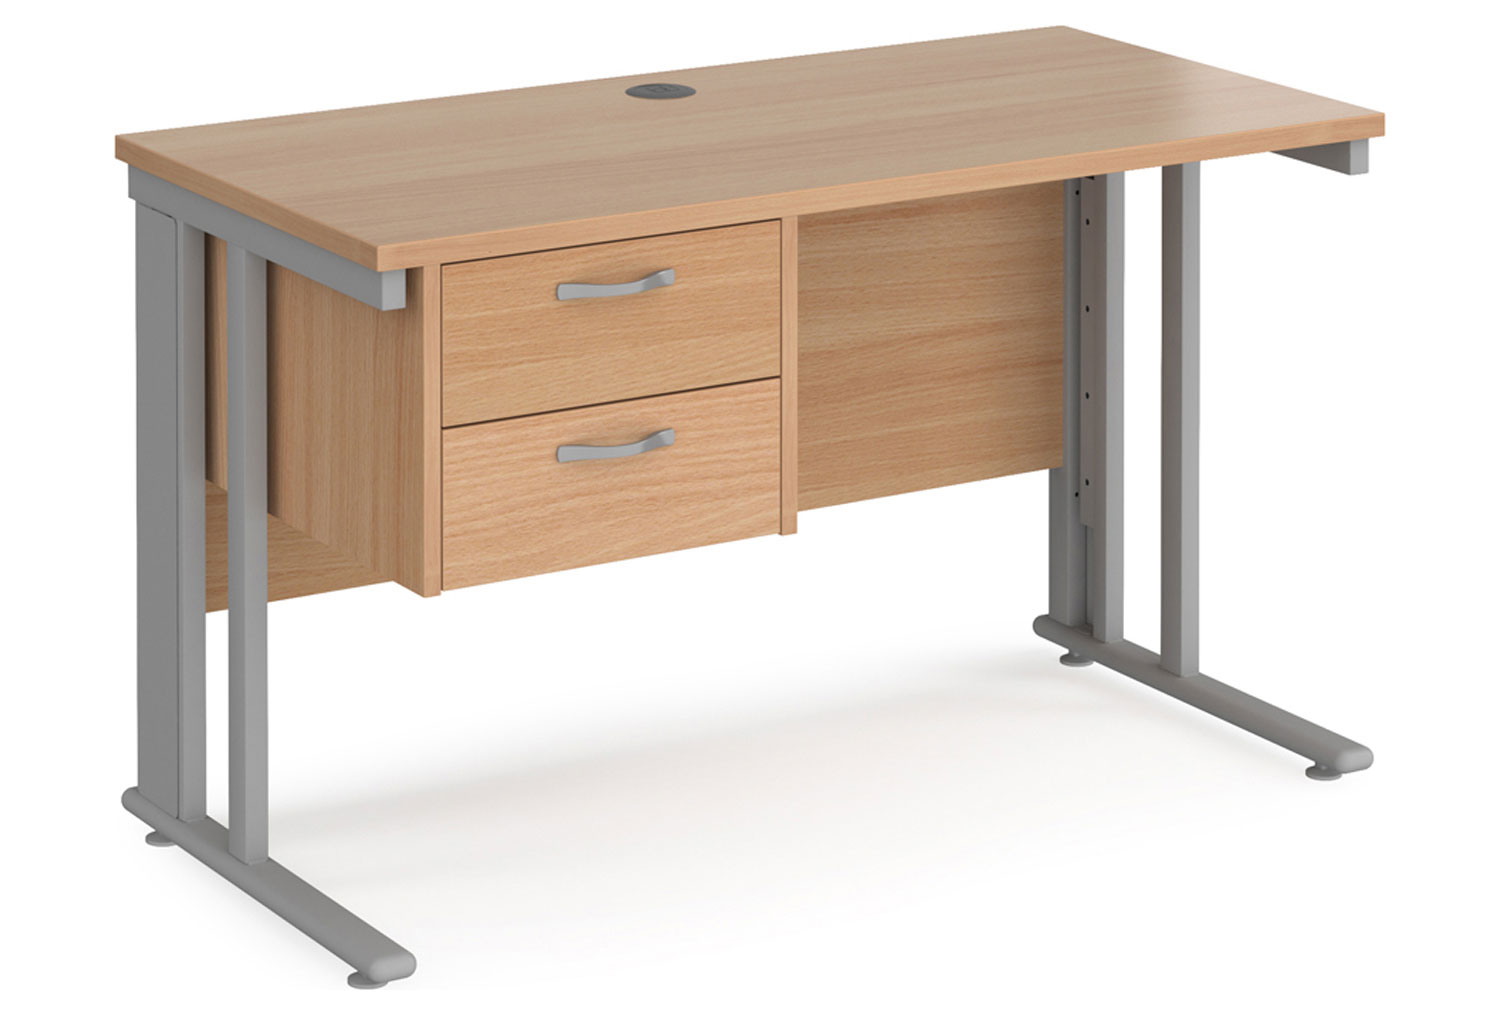 Value Line Deluxe Cable Managed Narrow Rectangular Office Desk 2 Drawers (Silver Legs), 120w60dx73h (cm), Beech